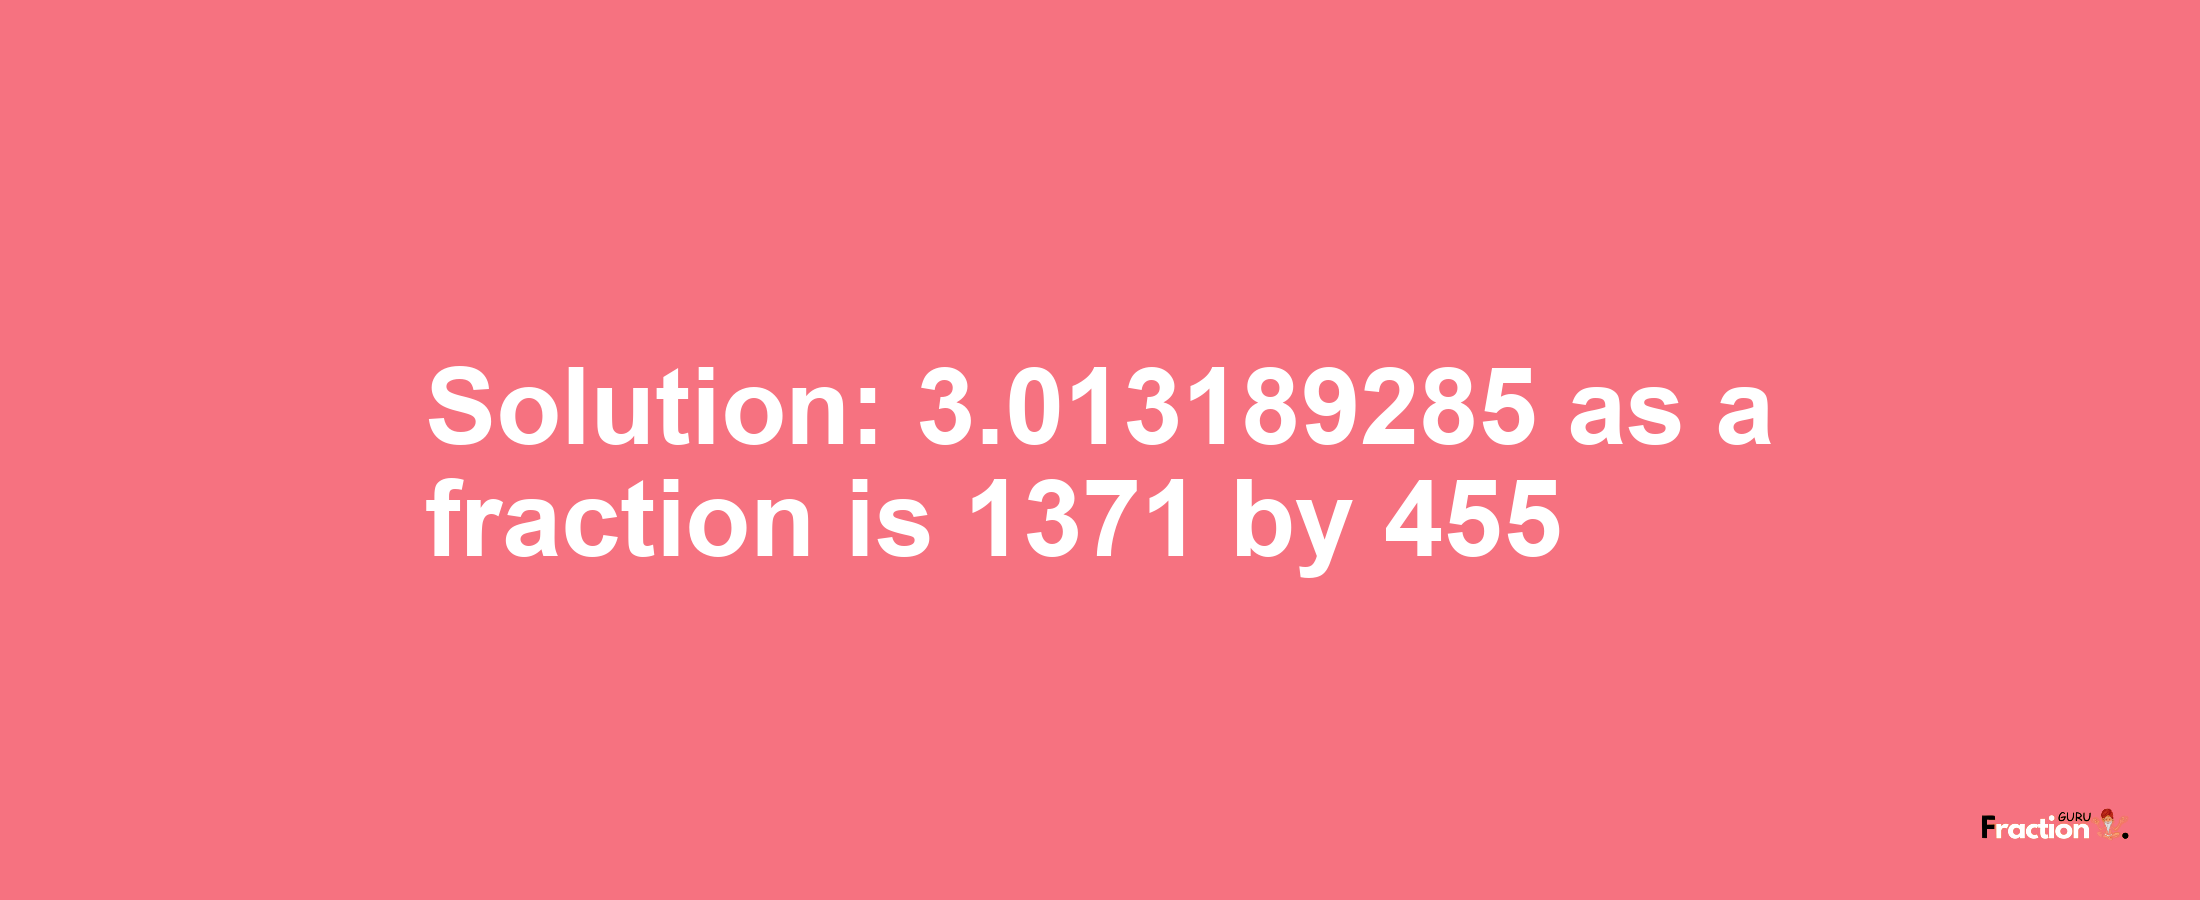 Solution:3.013189285 as a fraction is 1371/455